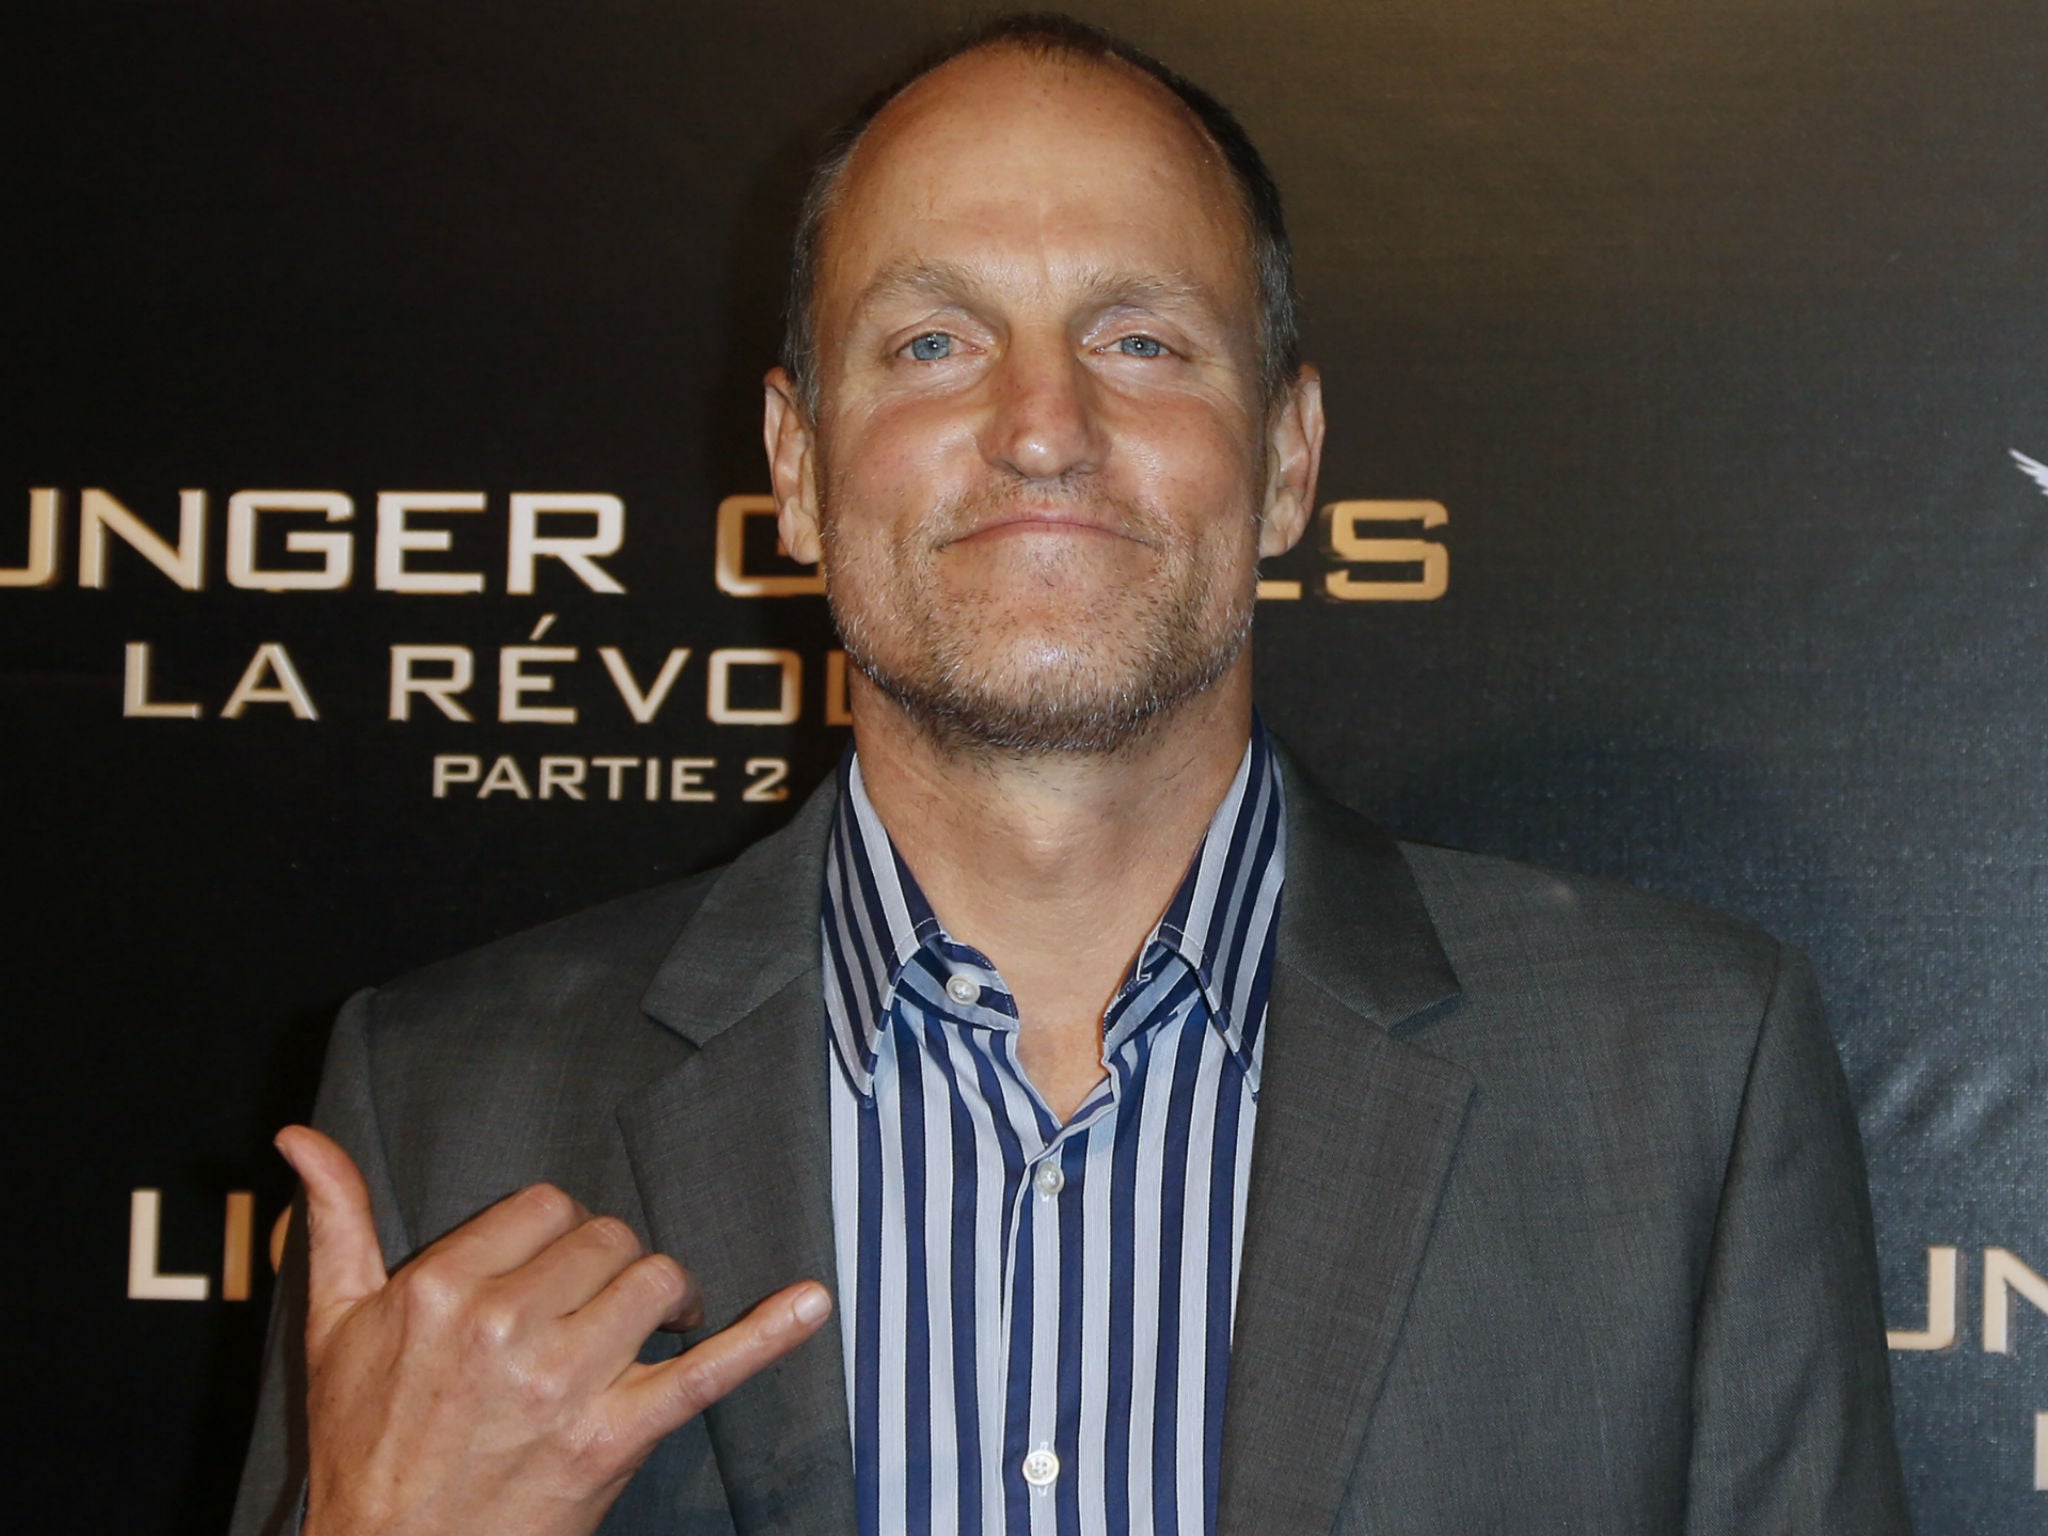 Woody Harrelson promotes The Hunger Games: Mockingjay Part 2 in the only way he knows how